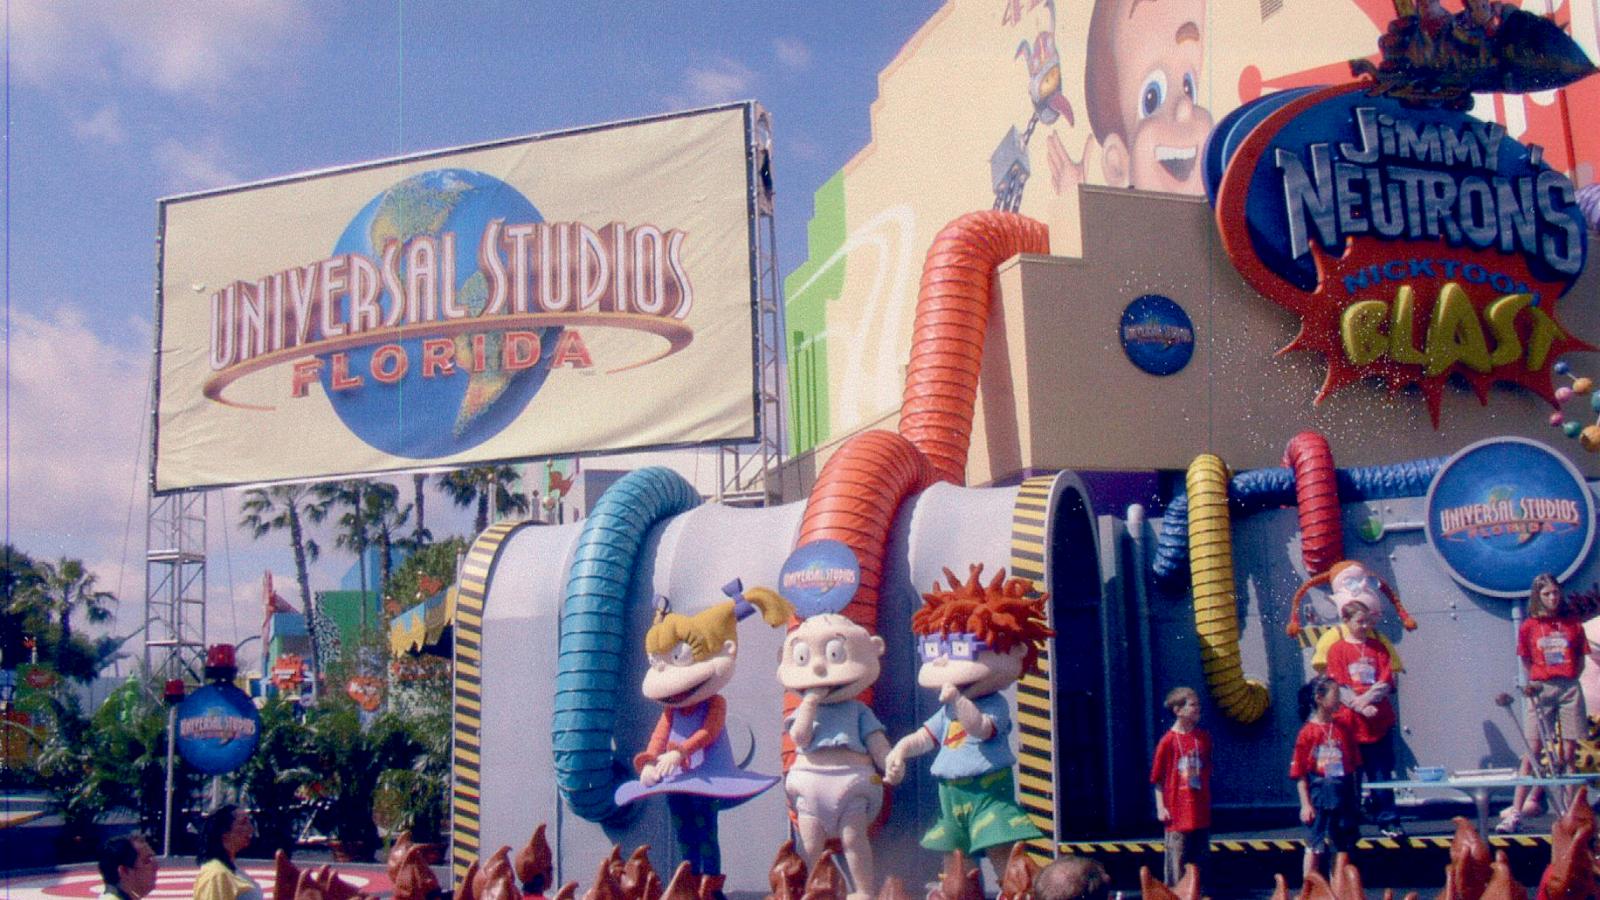 National Museum of Education, Jimmy Neutron Competition, Universal Studios